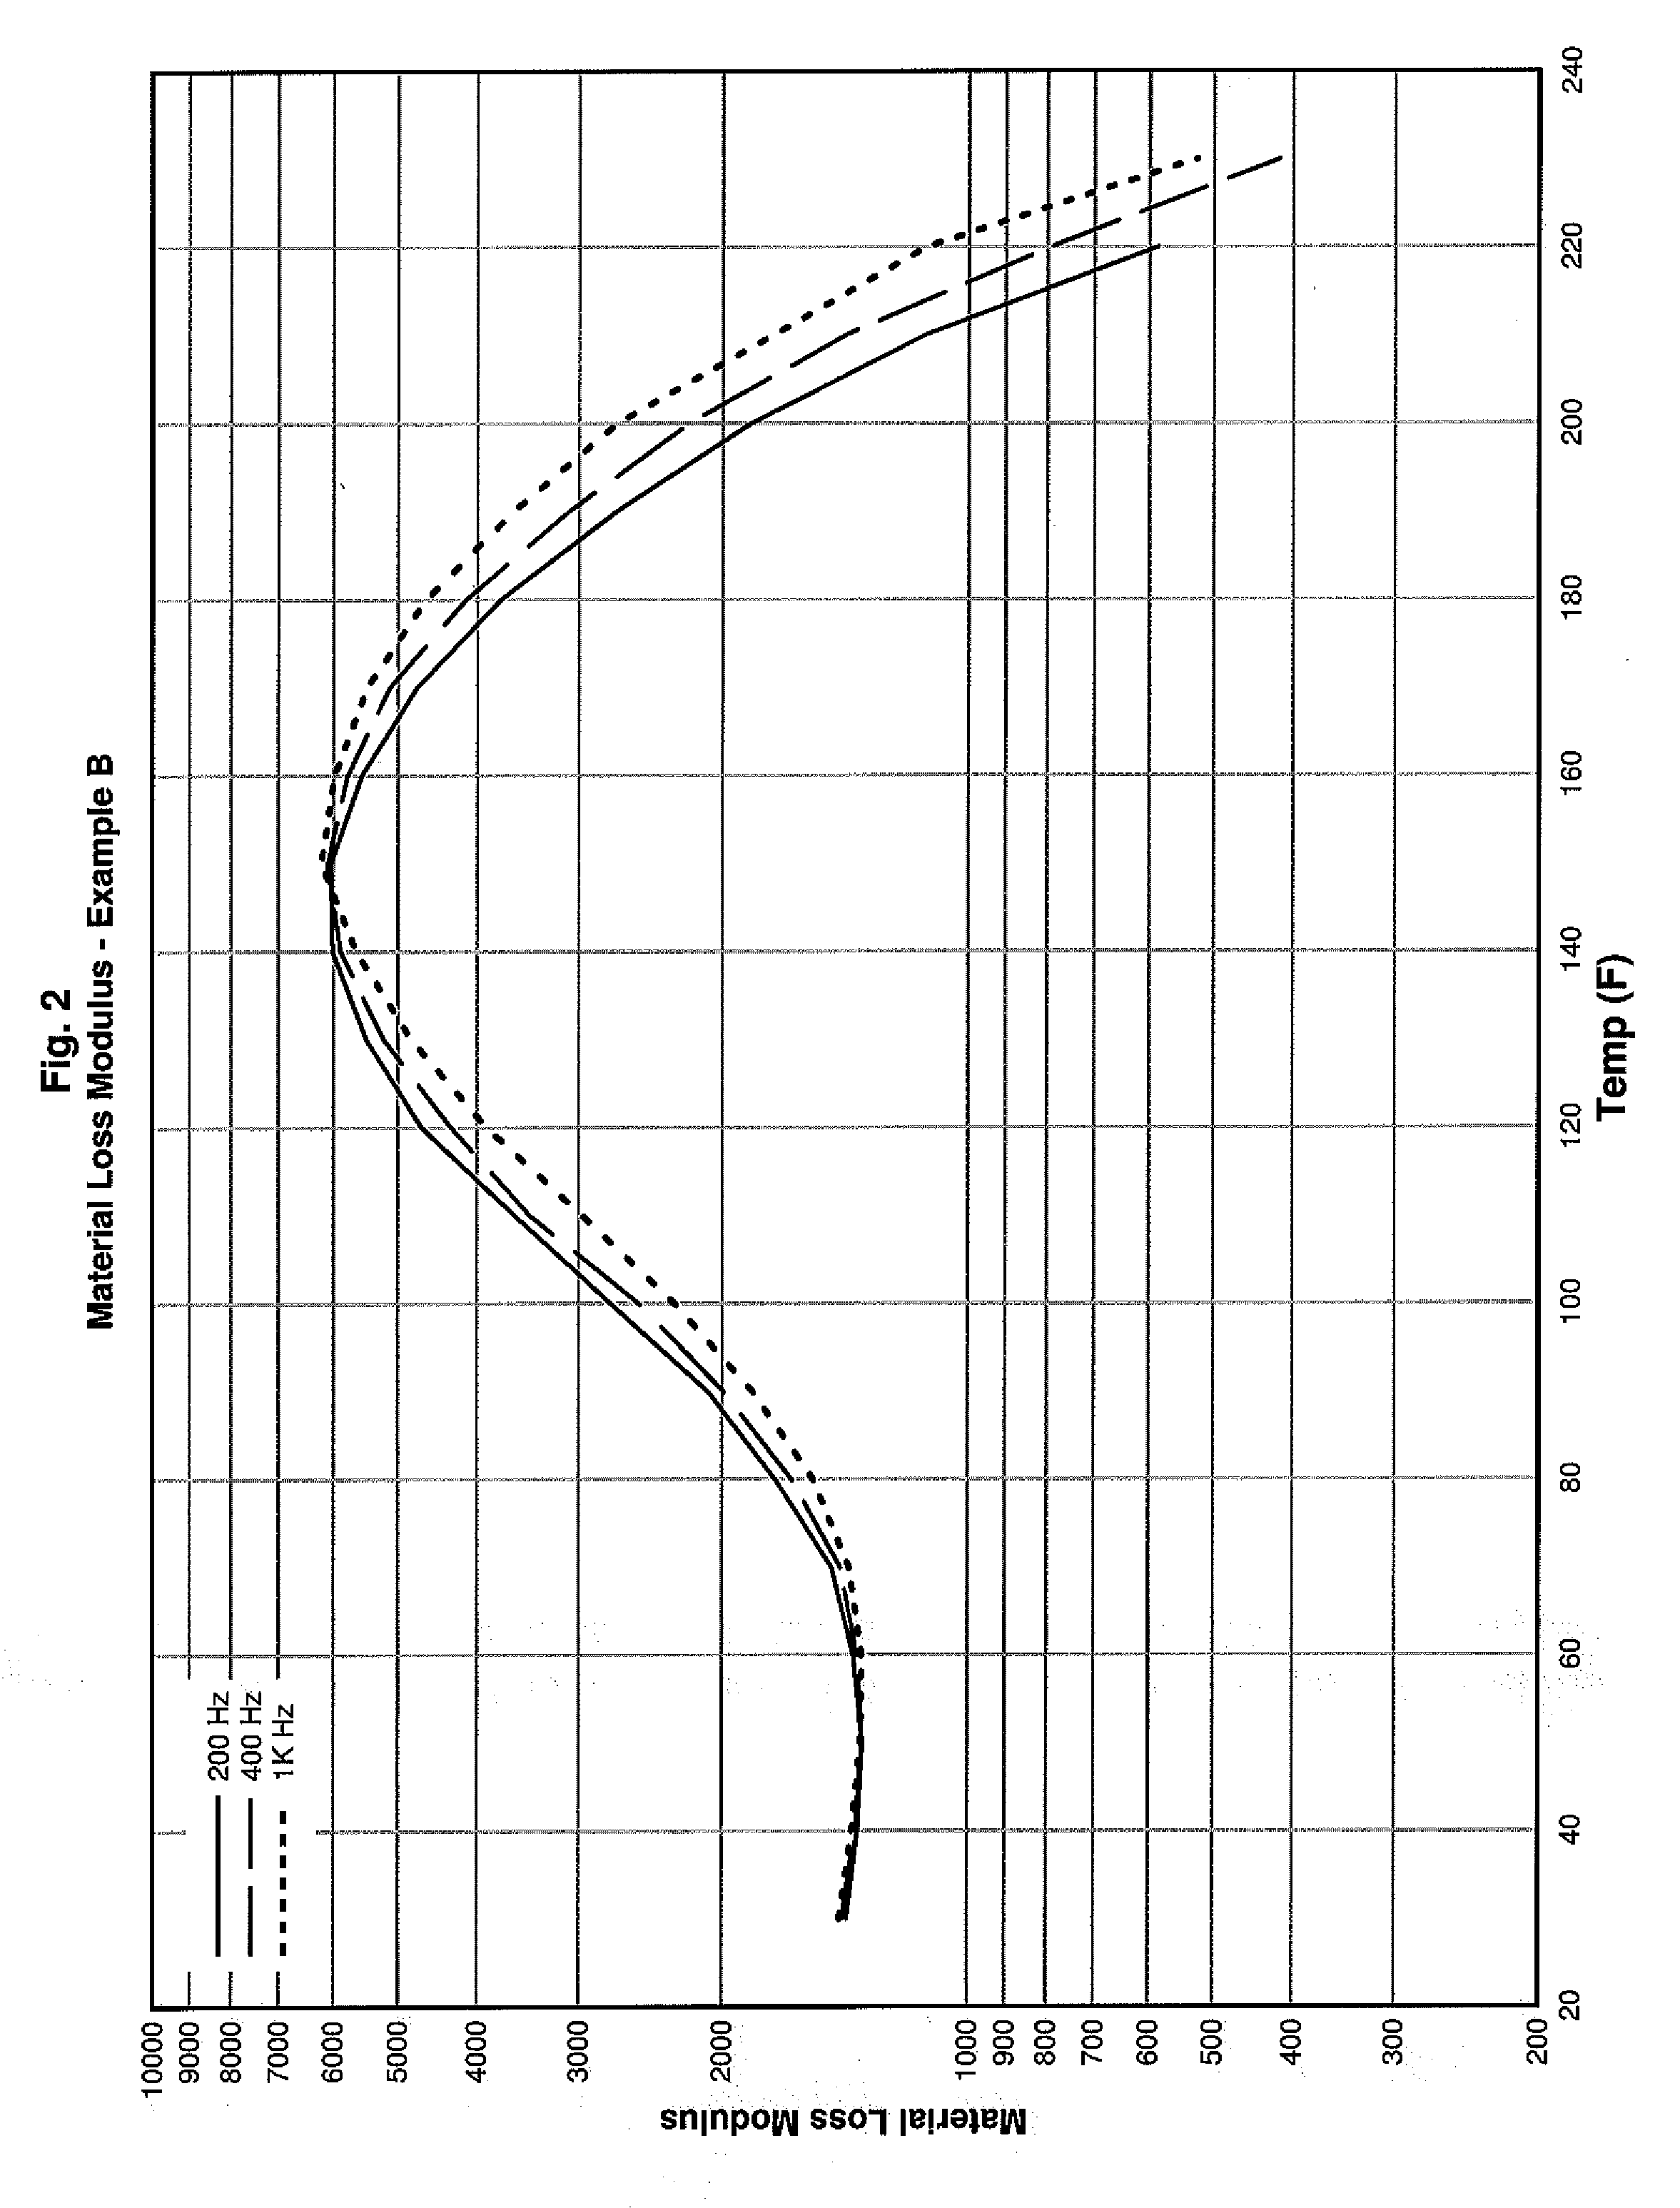 Coated articles demonstrating heat reduction and noise reduction properties